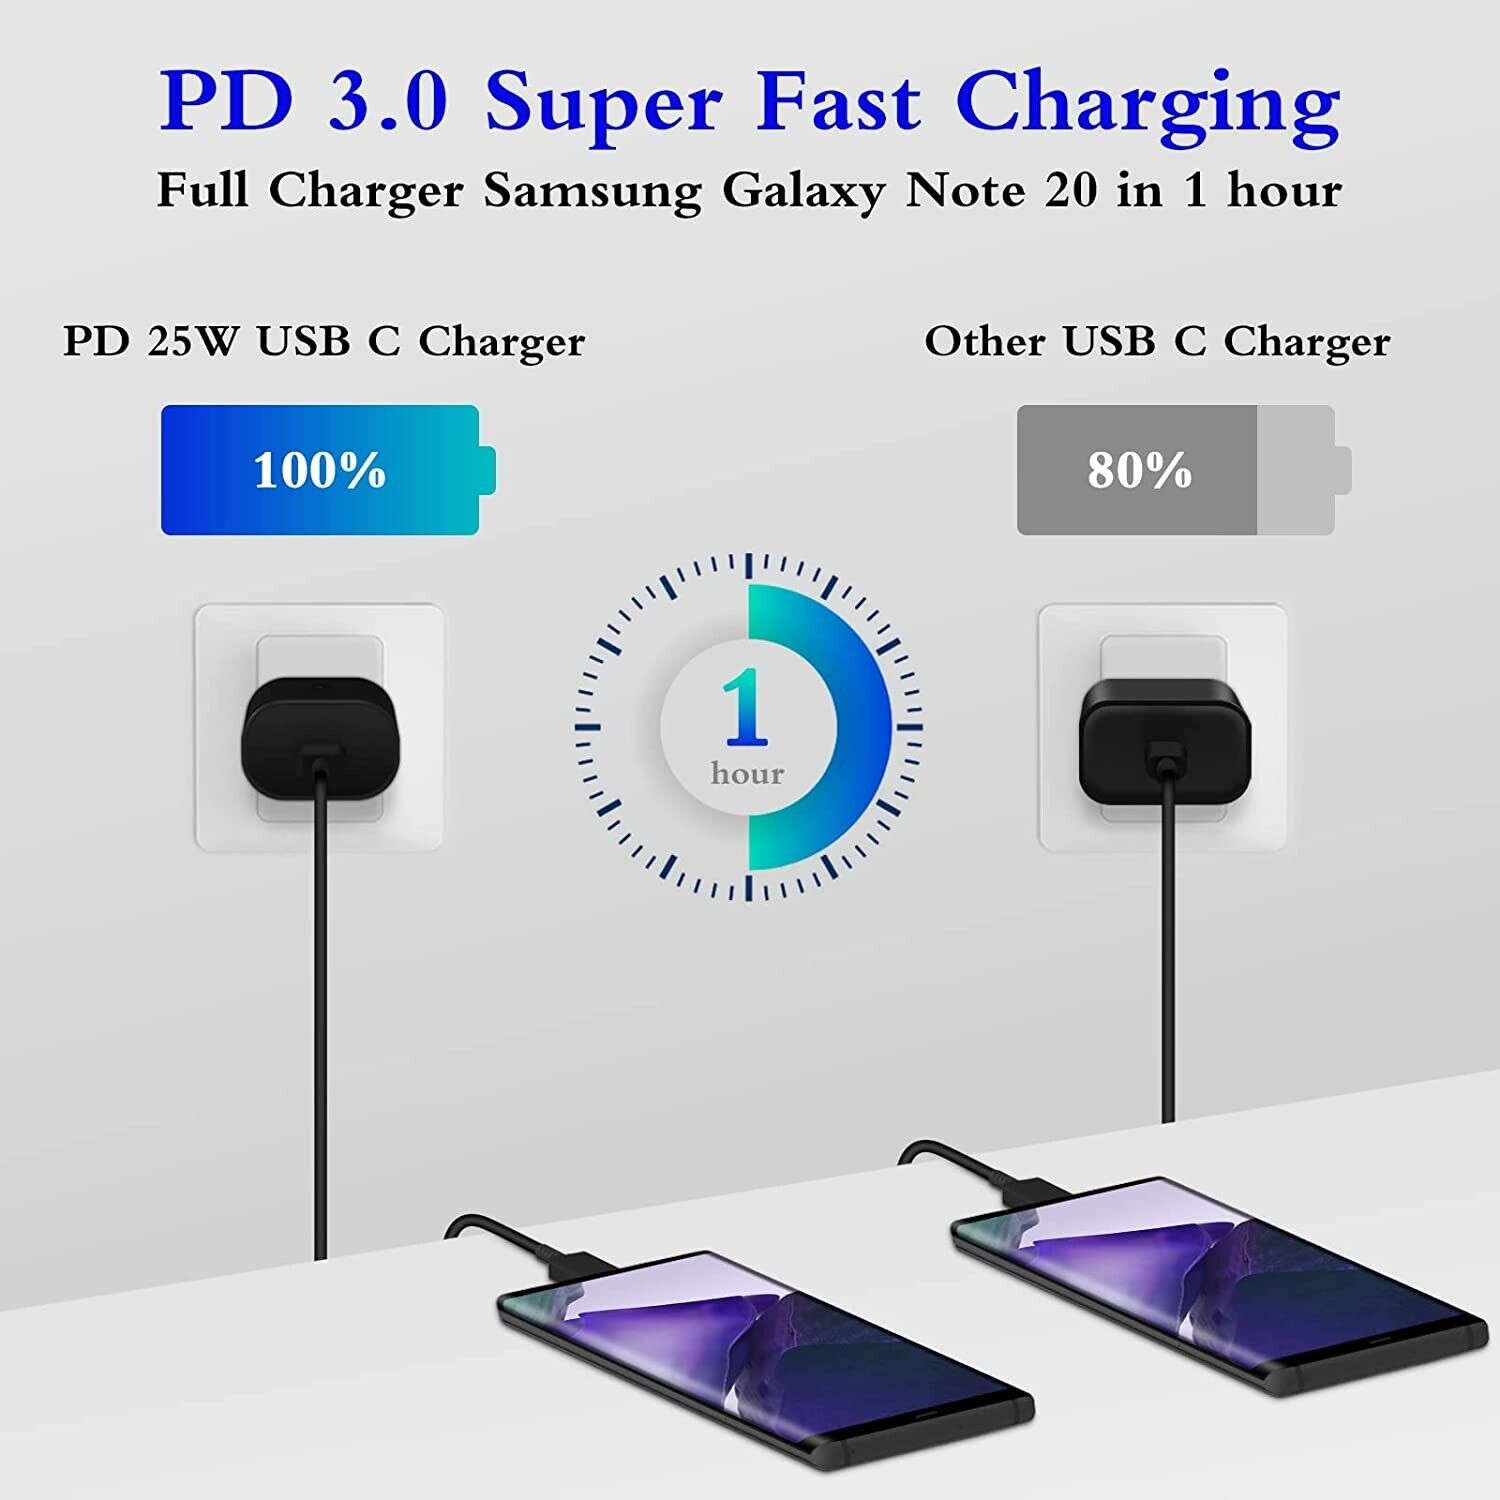 2x GENUINE 25 Watt SUPER Fast Wall Charger & USB-C Cable For Samsung S23 S22 S21 TCoology Quick Charge Rapid Charging, Galaxy S21 S21+ Ultra Plus 5G FE, Galaxy Note 10 10+ Ultra Plus 5G, Galaxy Note 20 20+ Ultra Plus 5G, Galaxy S20 S20+ Ultra 5G Ultra, LG V30 40 50 60 Stylo 4 5 6, Power Delivery PD, Galaxy A20 A21 A22 A50 A51 A52, LG V30 V40 V50 V60 Stylo 4 5 6, Galaxy Tab S3 S4 S5 S6 S7 Pro, Extra Long Charger Cord Wire Plug, Galaxy A70 A71 A32 S10 S10+ Plus, Galaxy S10e/S9/S9+/S8/S8+ Plus, 2020 2018 iPad Pro 11/12.9, Motorola Moto Edge Plus One Zoom, Moto G 5G Plus Hyper One Vision G8 G9, Galaxy A90 A91 A92 A72 S8 S9 Plus, Galaxy Note 8 9 Tab S8 Pro - фотография #4